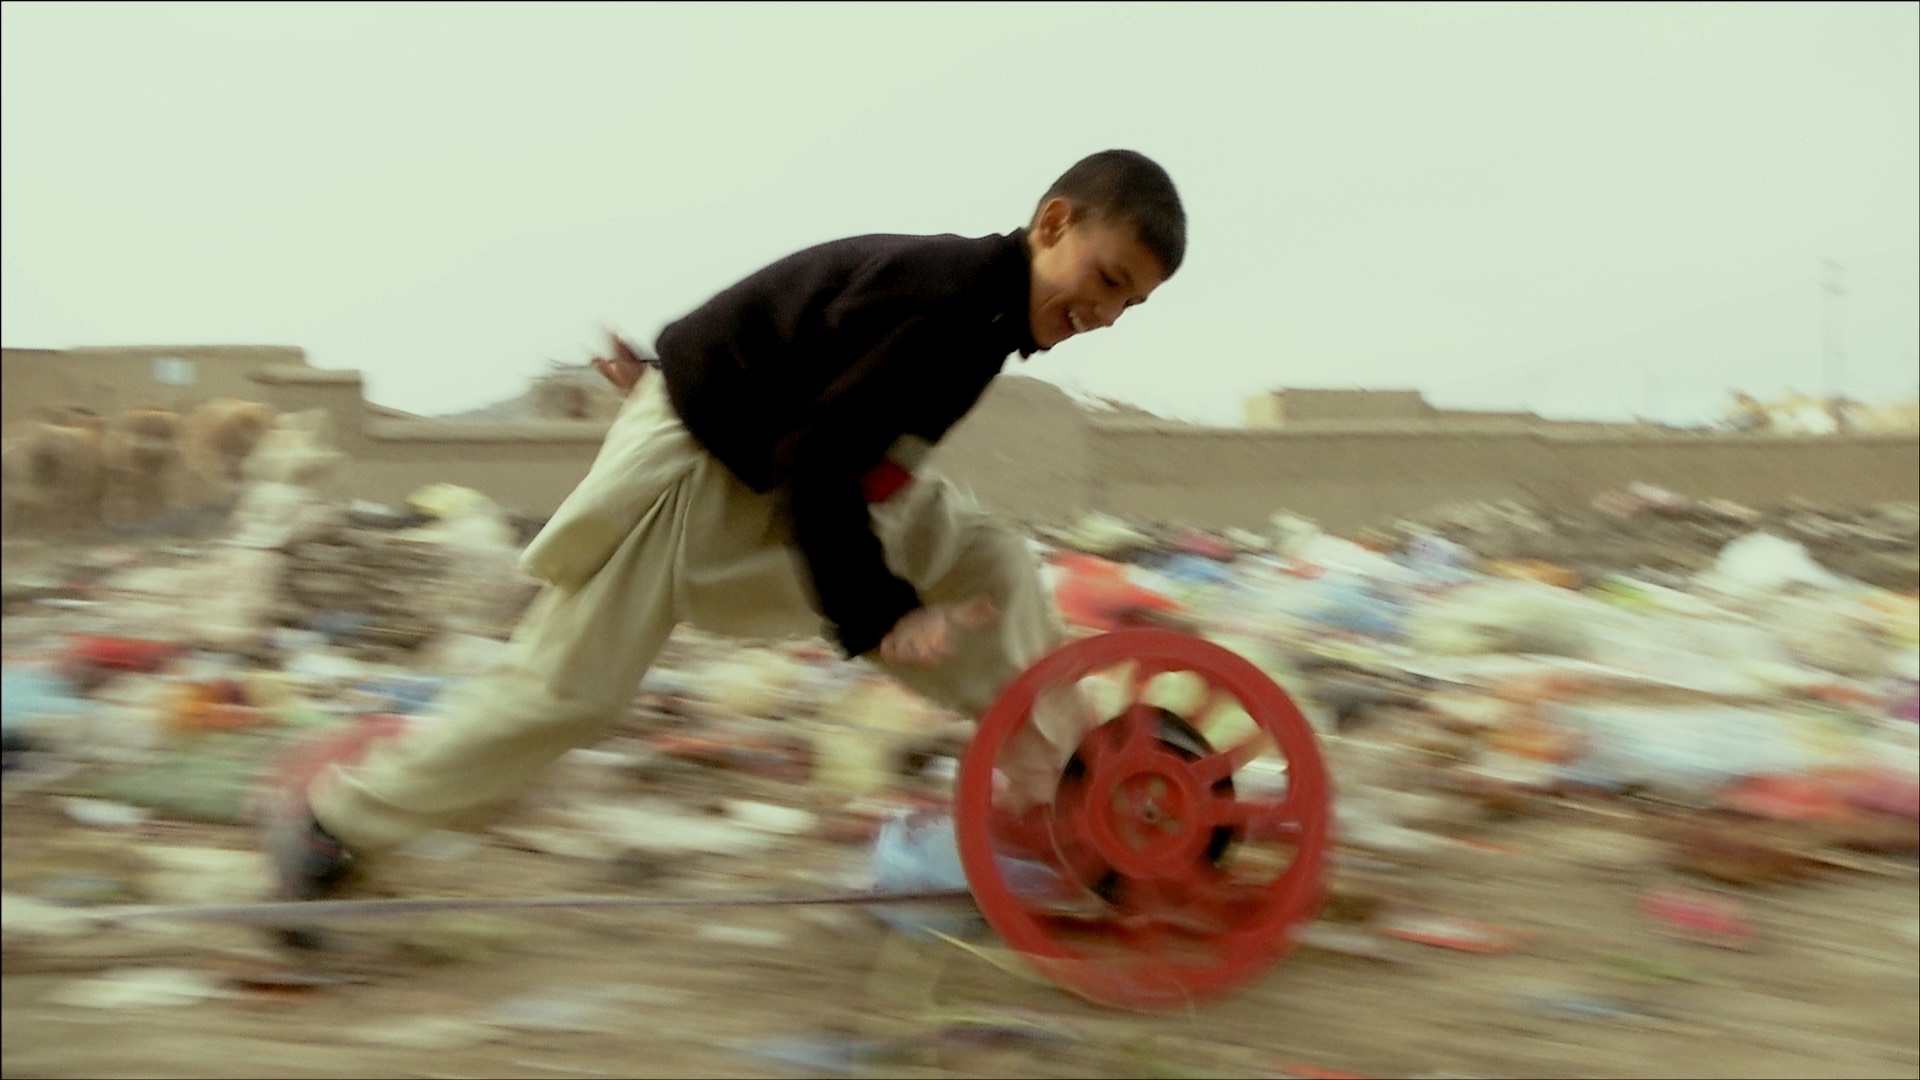 Abb.: Francis Alÿs, Reel/Unreel, 2011; in collaboration with Julien Devaux and Ajmal Maiwandi, Kabul, Afghanistan; Video documentation of an action, color, sound (courtesy Galerie Peter Kilchmann)